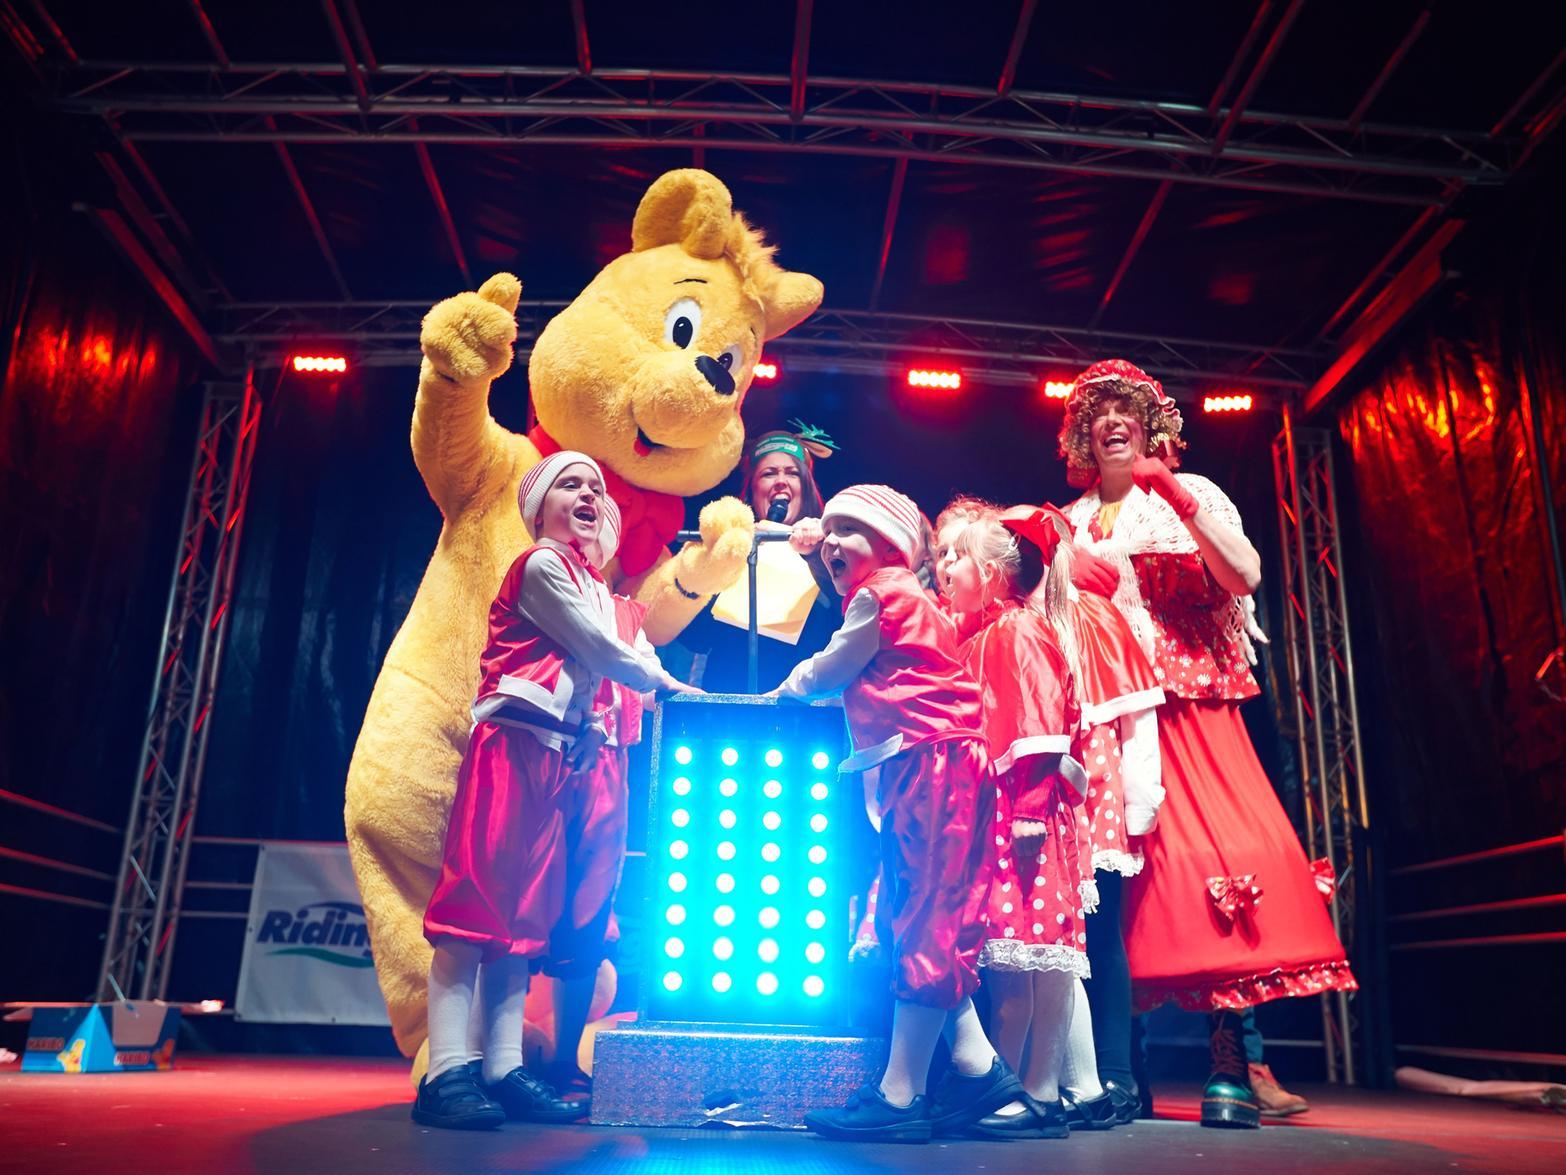 The Harribo Bear was joined by Holly and the Sunbeams on stage to switch on the lights.